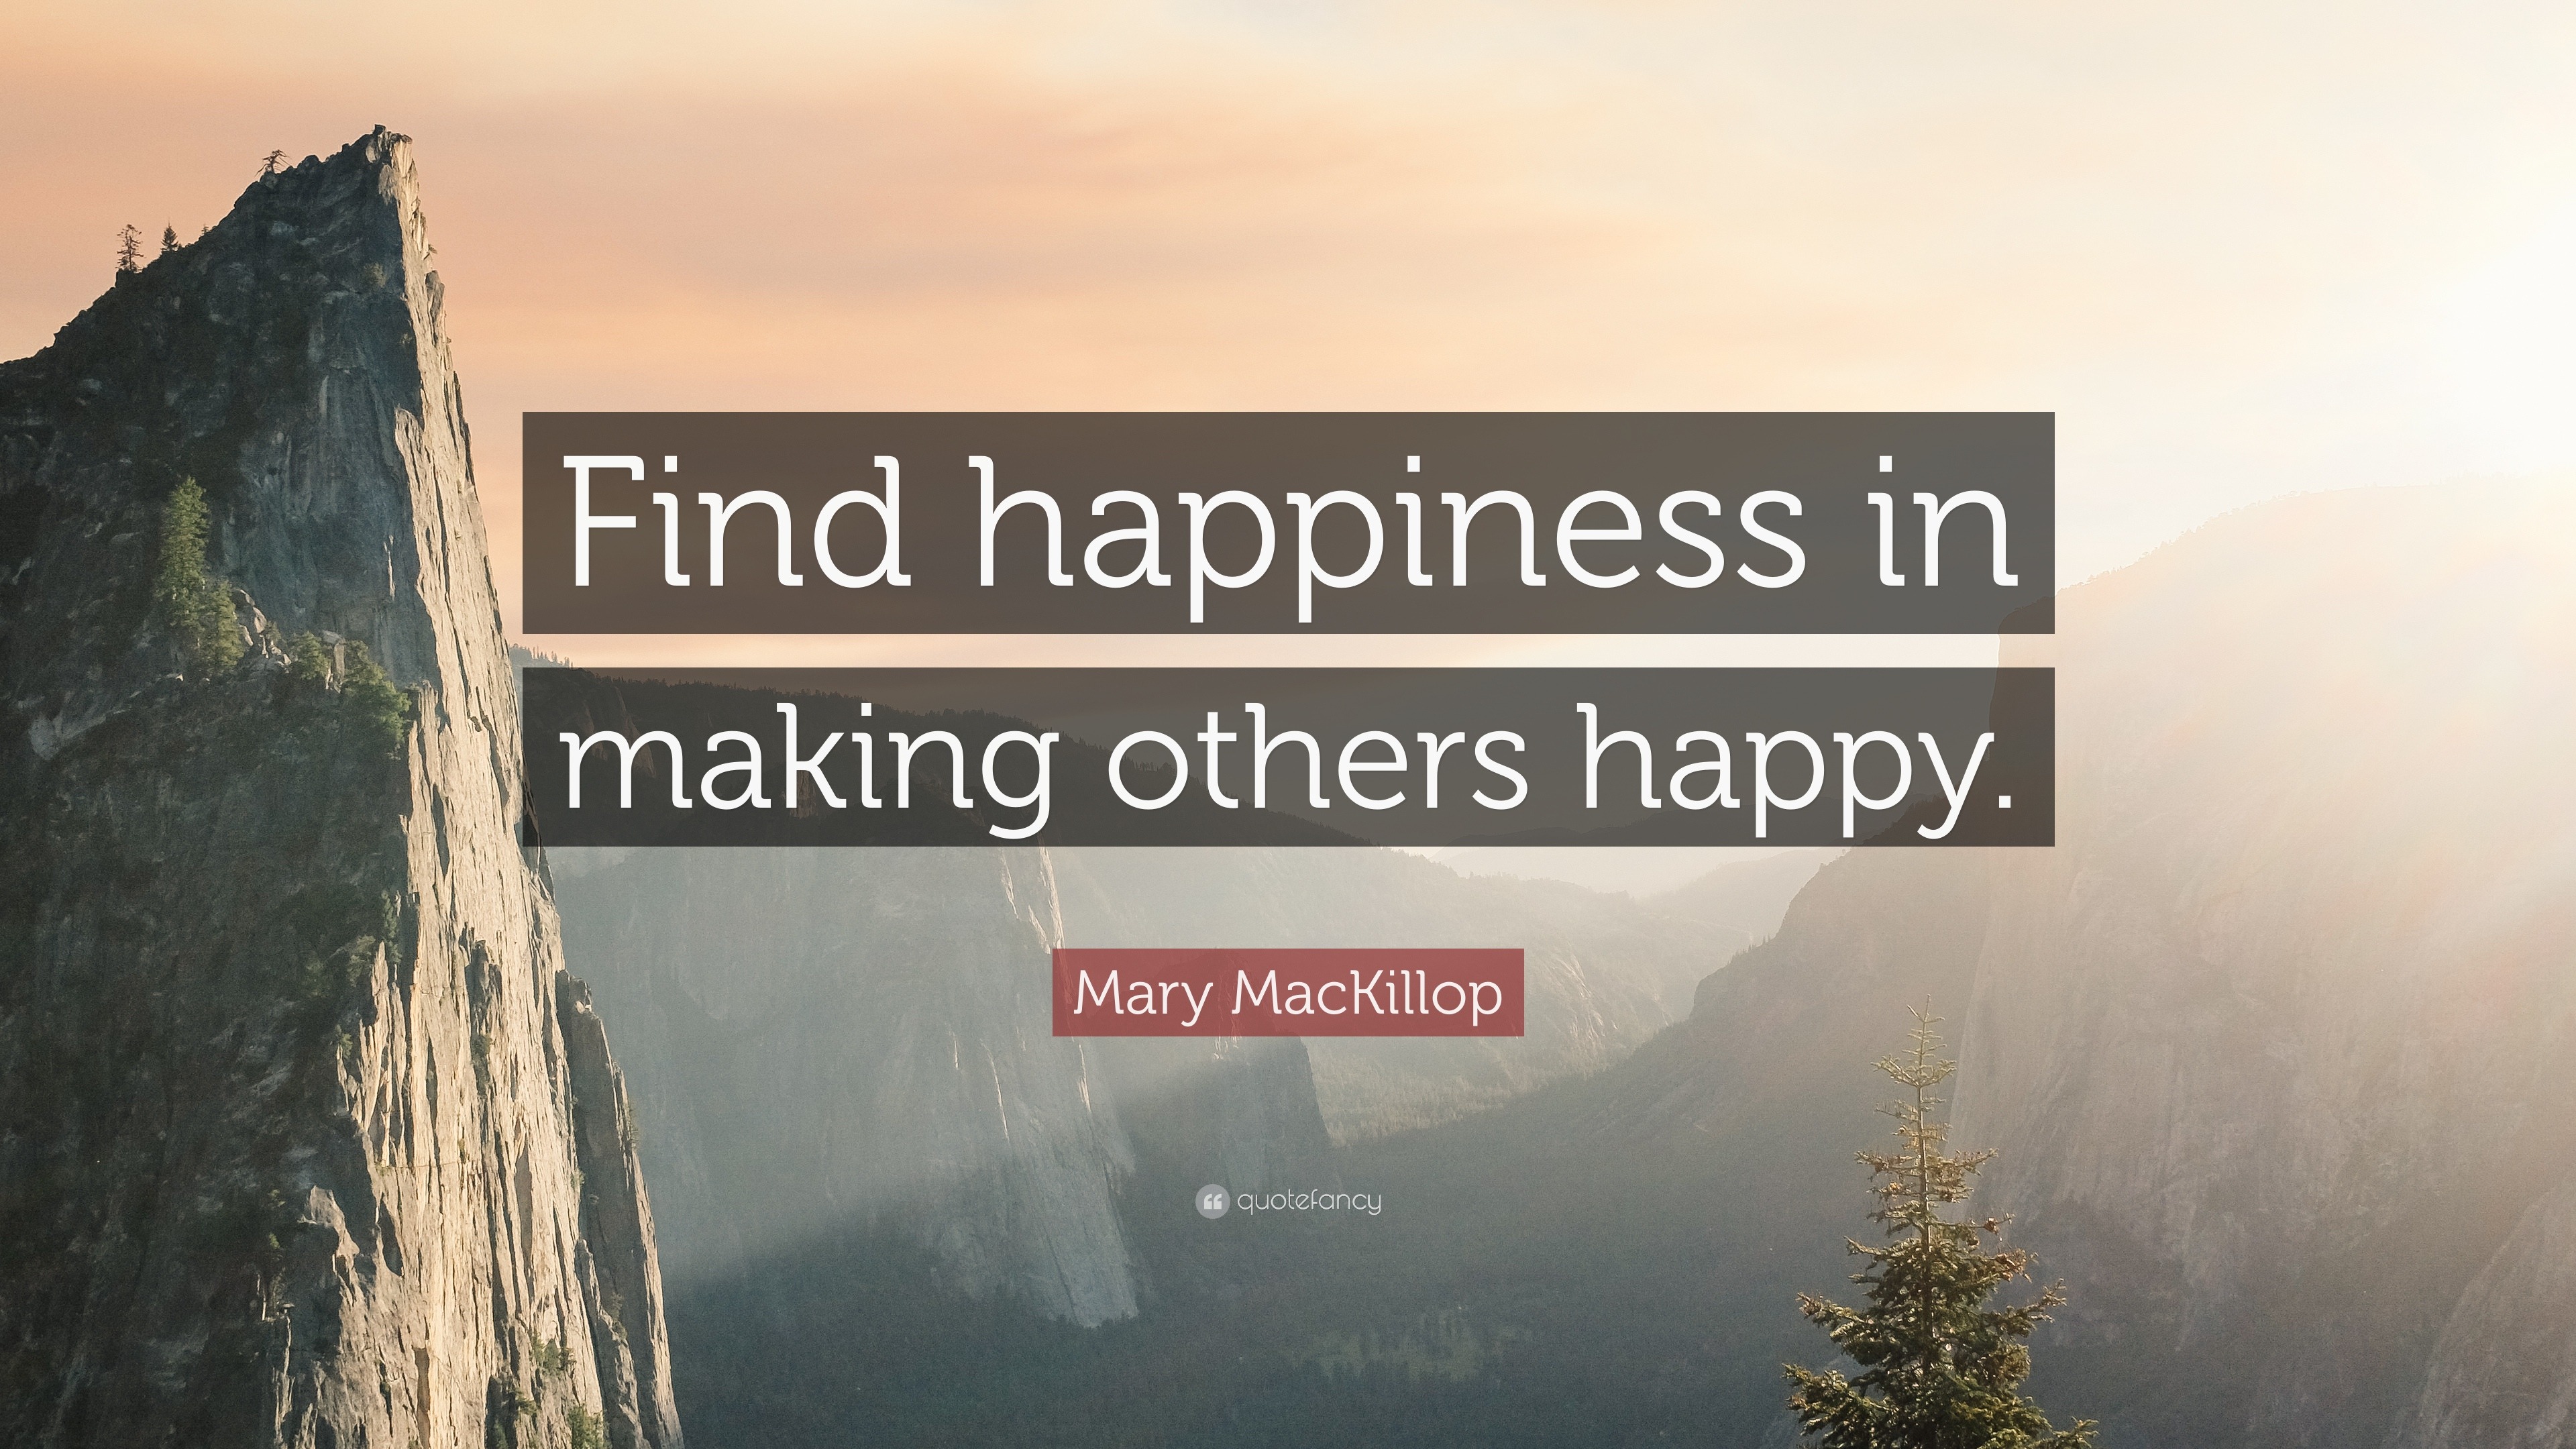 Mary MacKillop Quotes (6 wallpapers) - Quotefancy